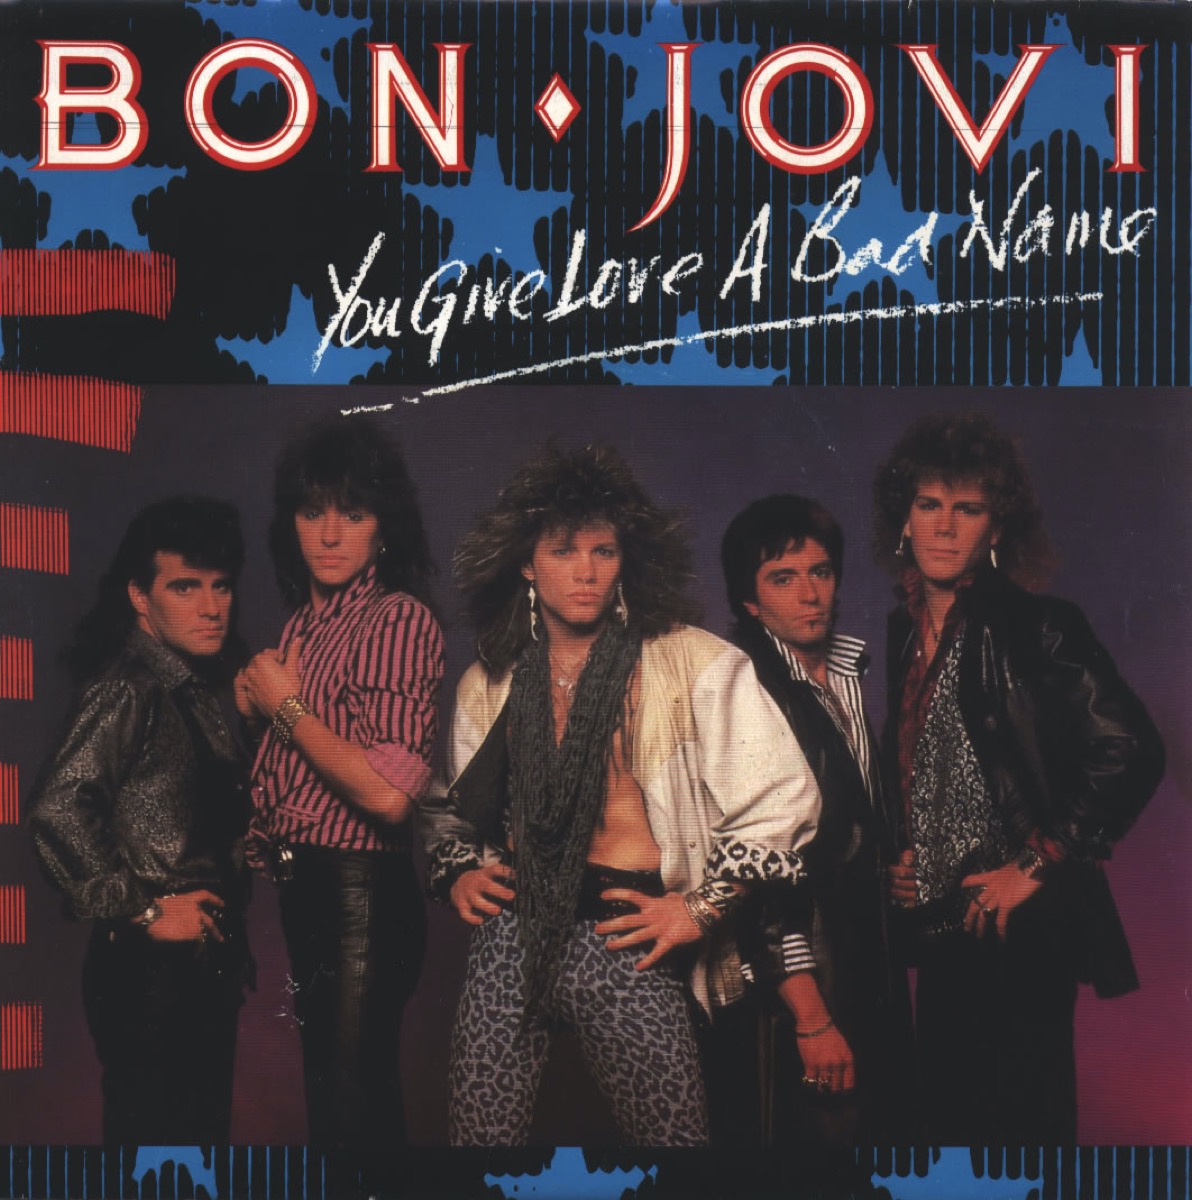 Single cover art for "You Give Love a Bad Name" by Bon Jovi